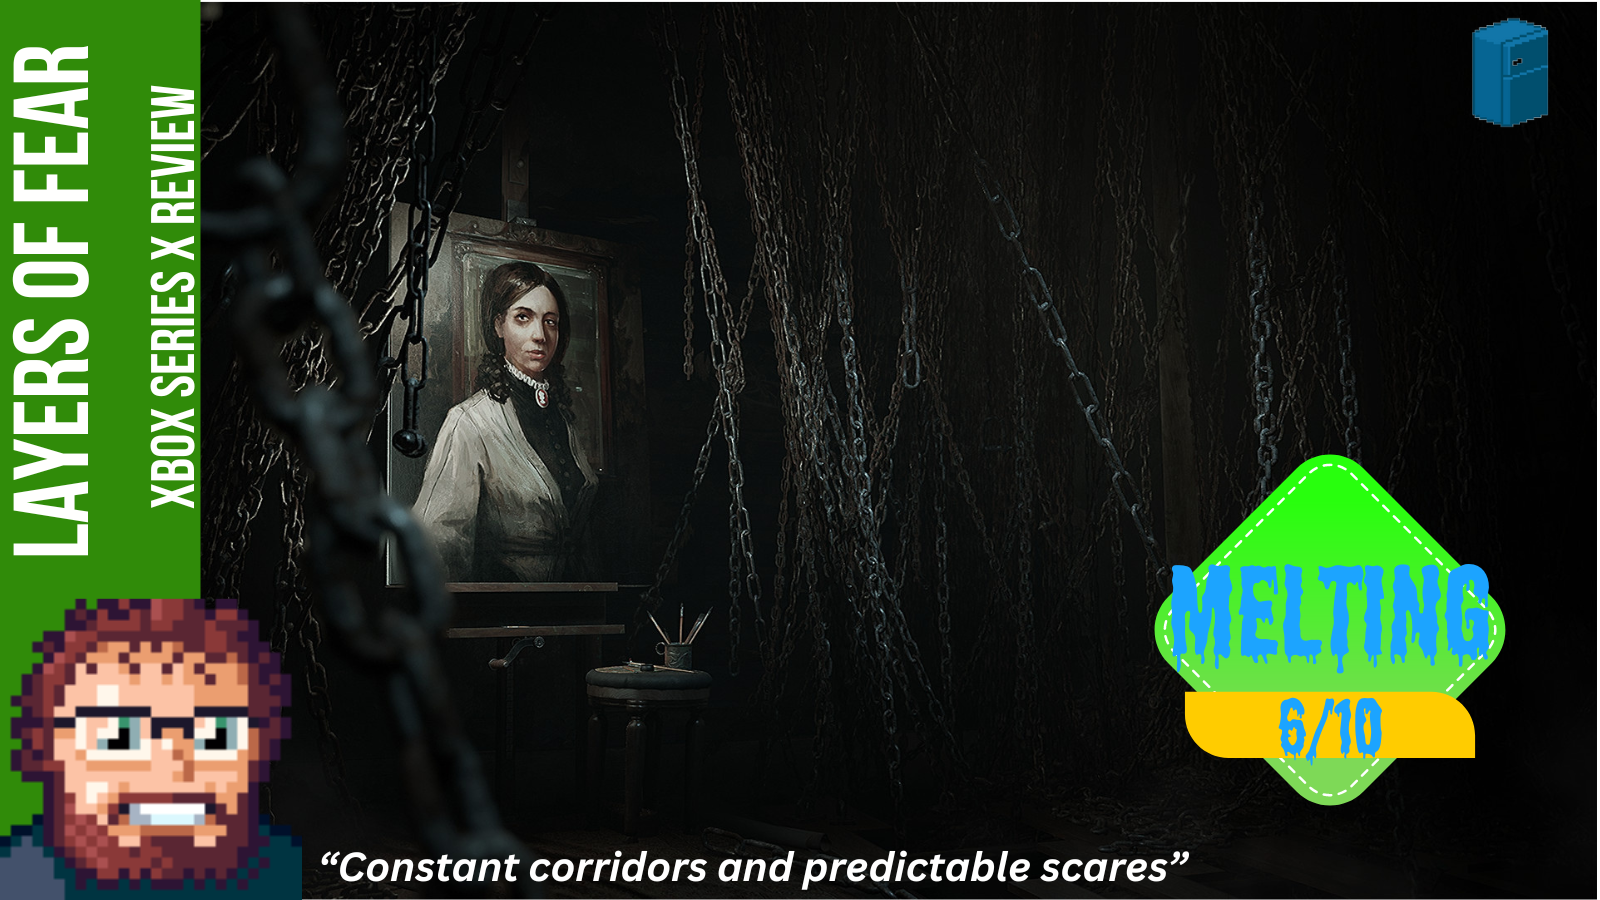 Layers of Fear Game Review